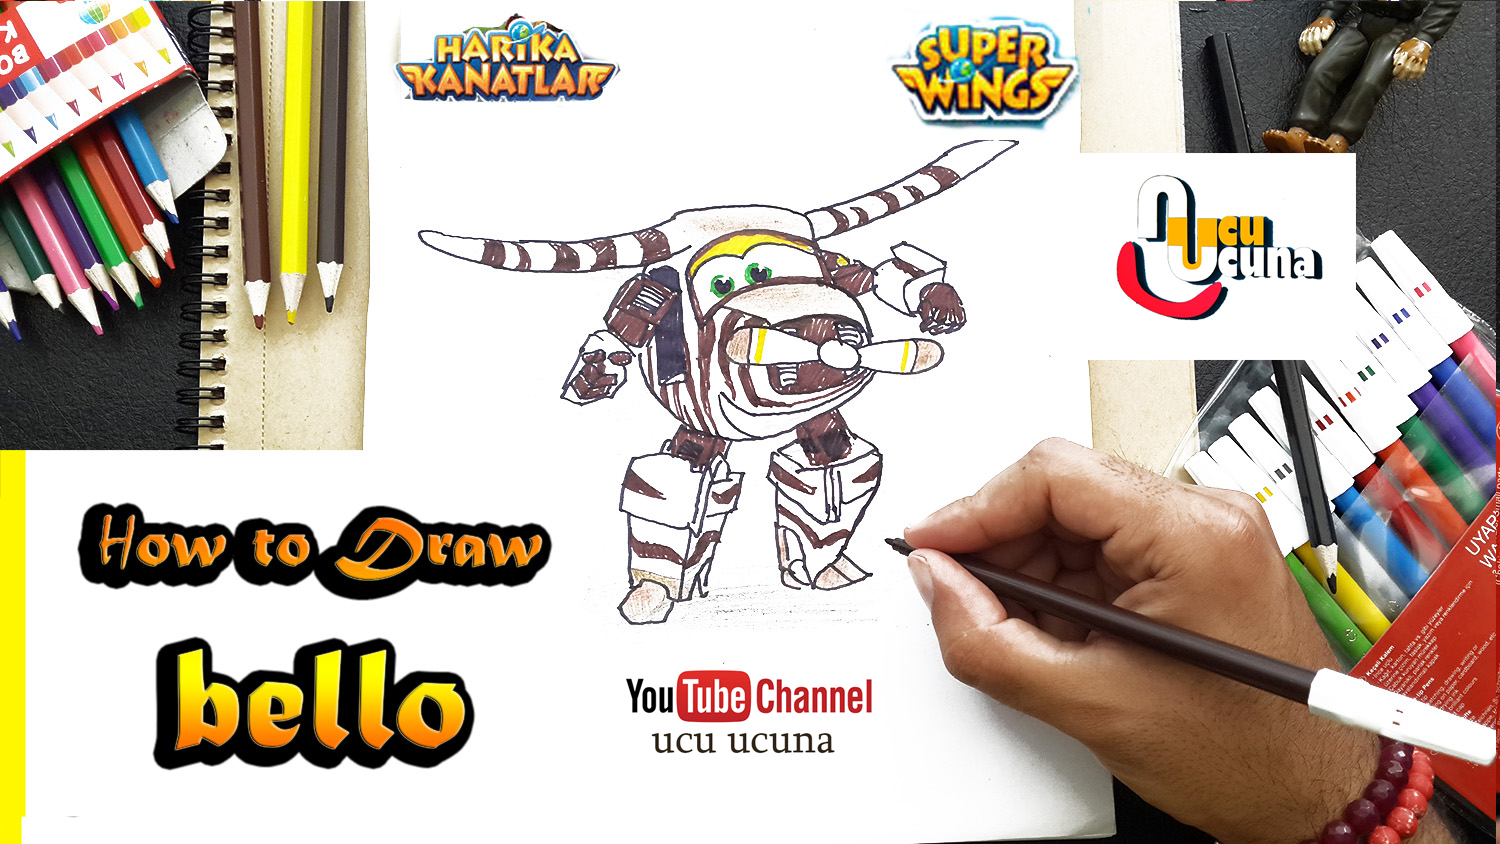 How to draw superwings draw step by step tutorial funny art basic kids draw lets art do if you look tutorial click youtube channel ucu ucuna